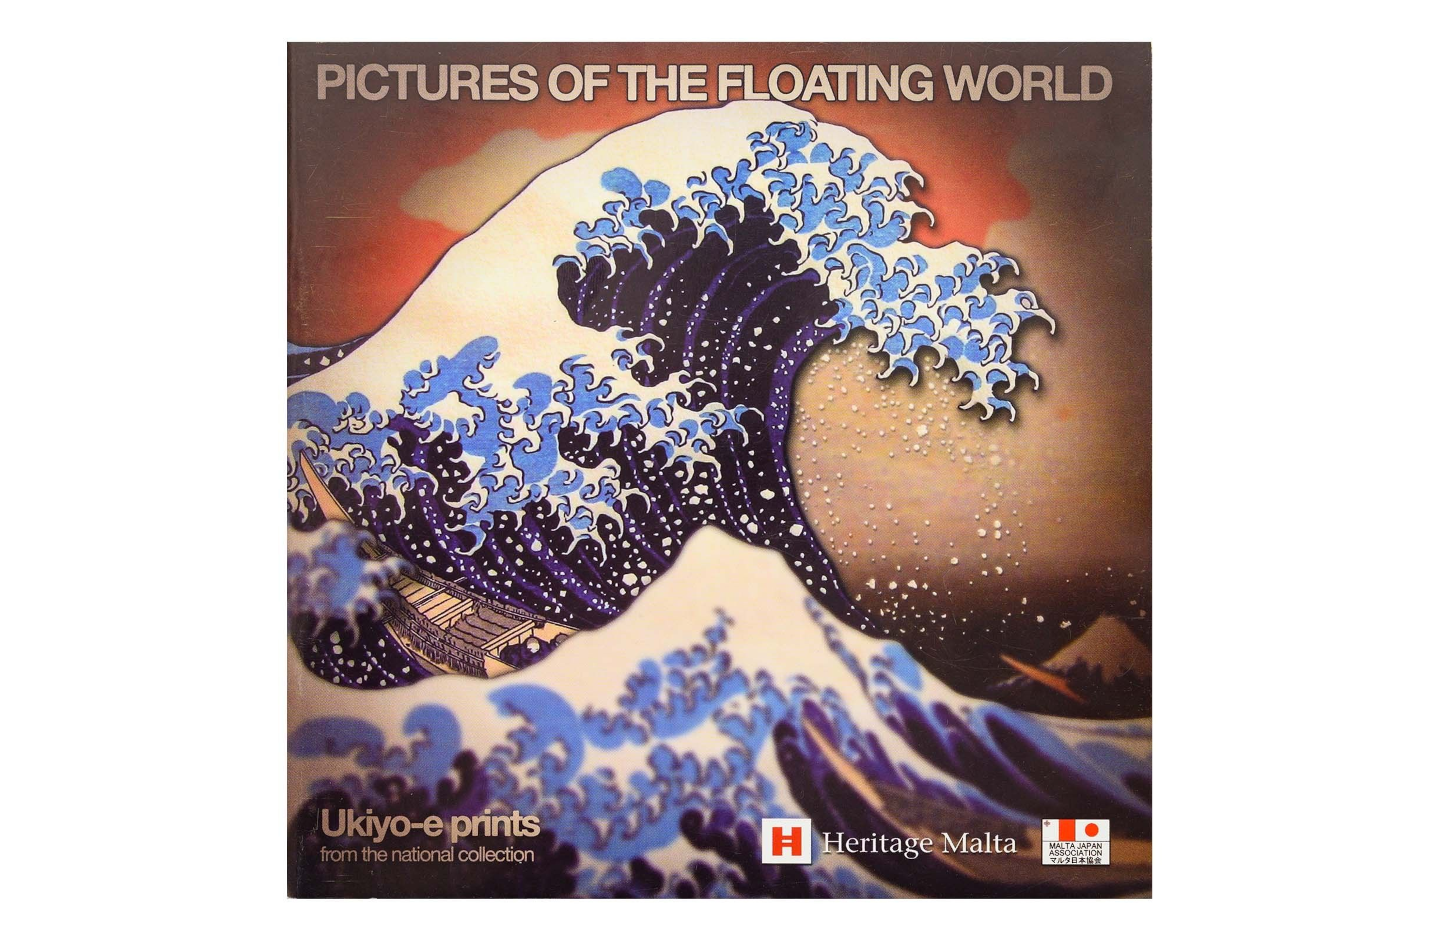 Pictures of the Floating World, Ukiyo-eprints from the National Collection